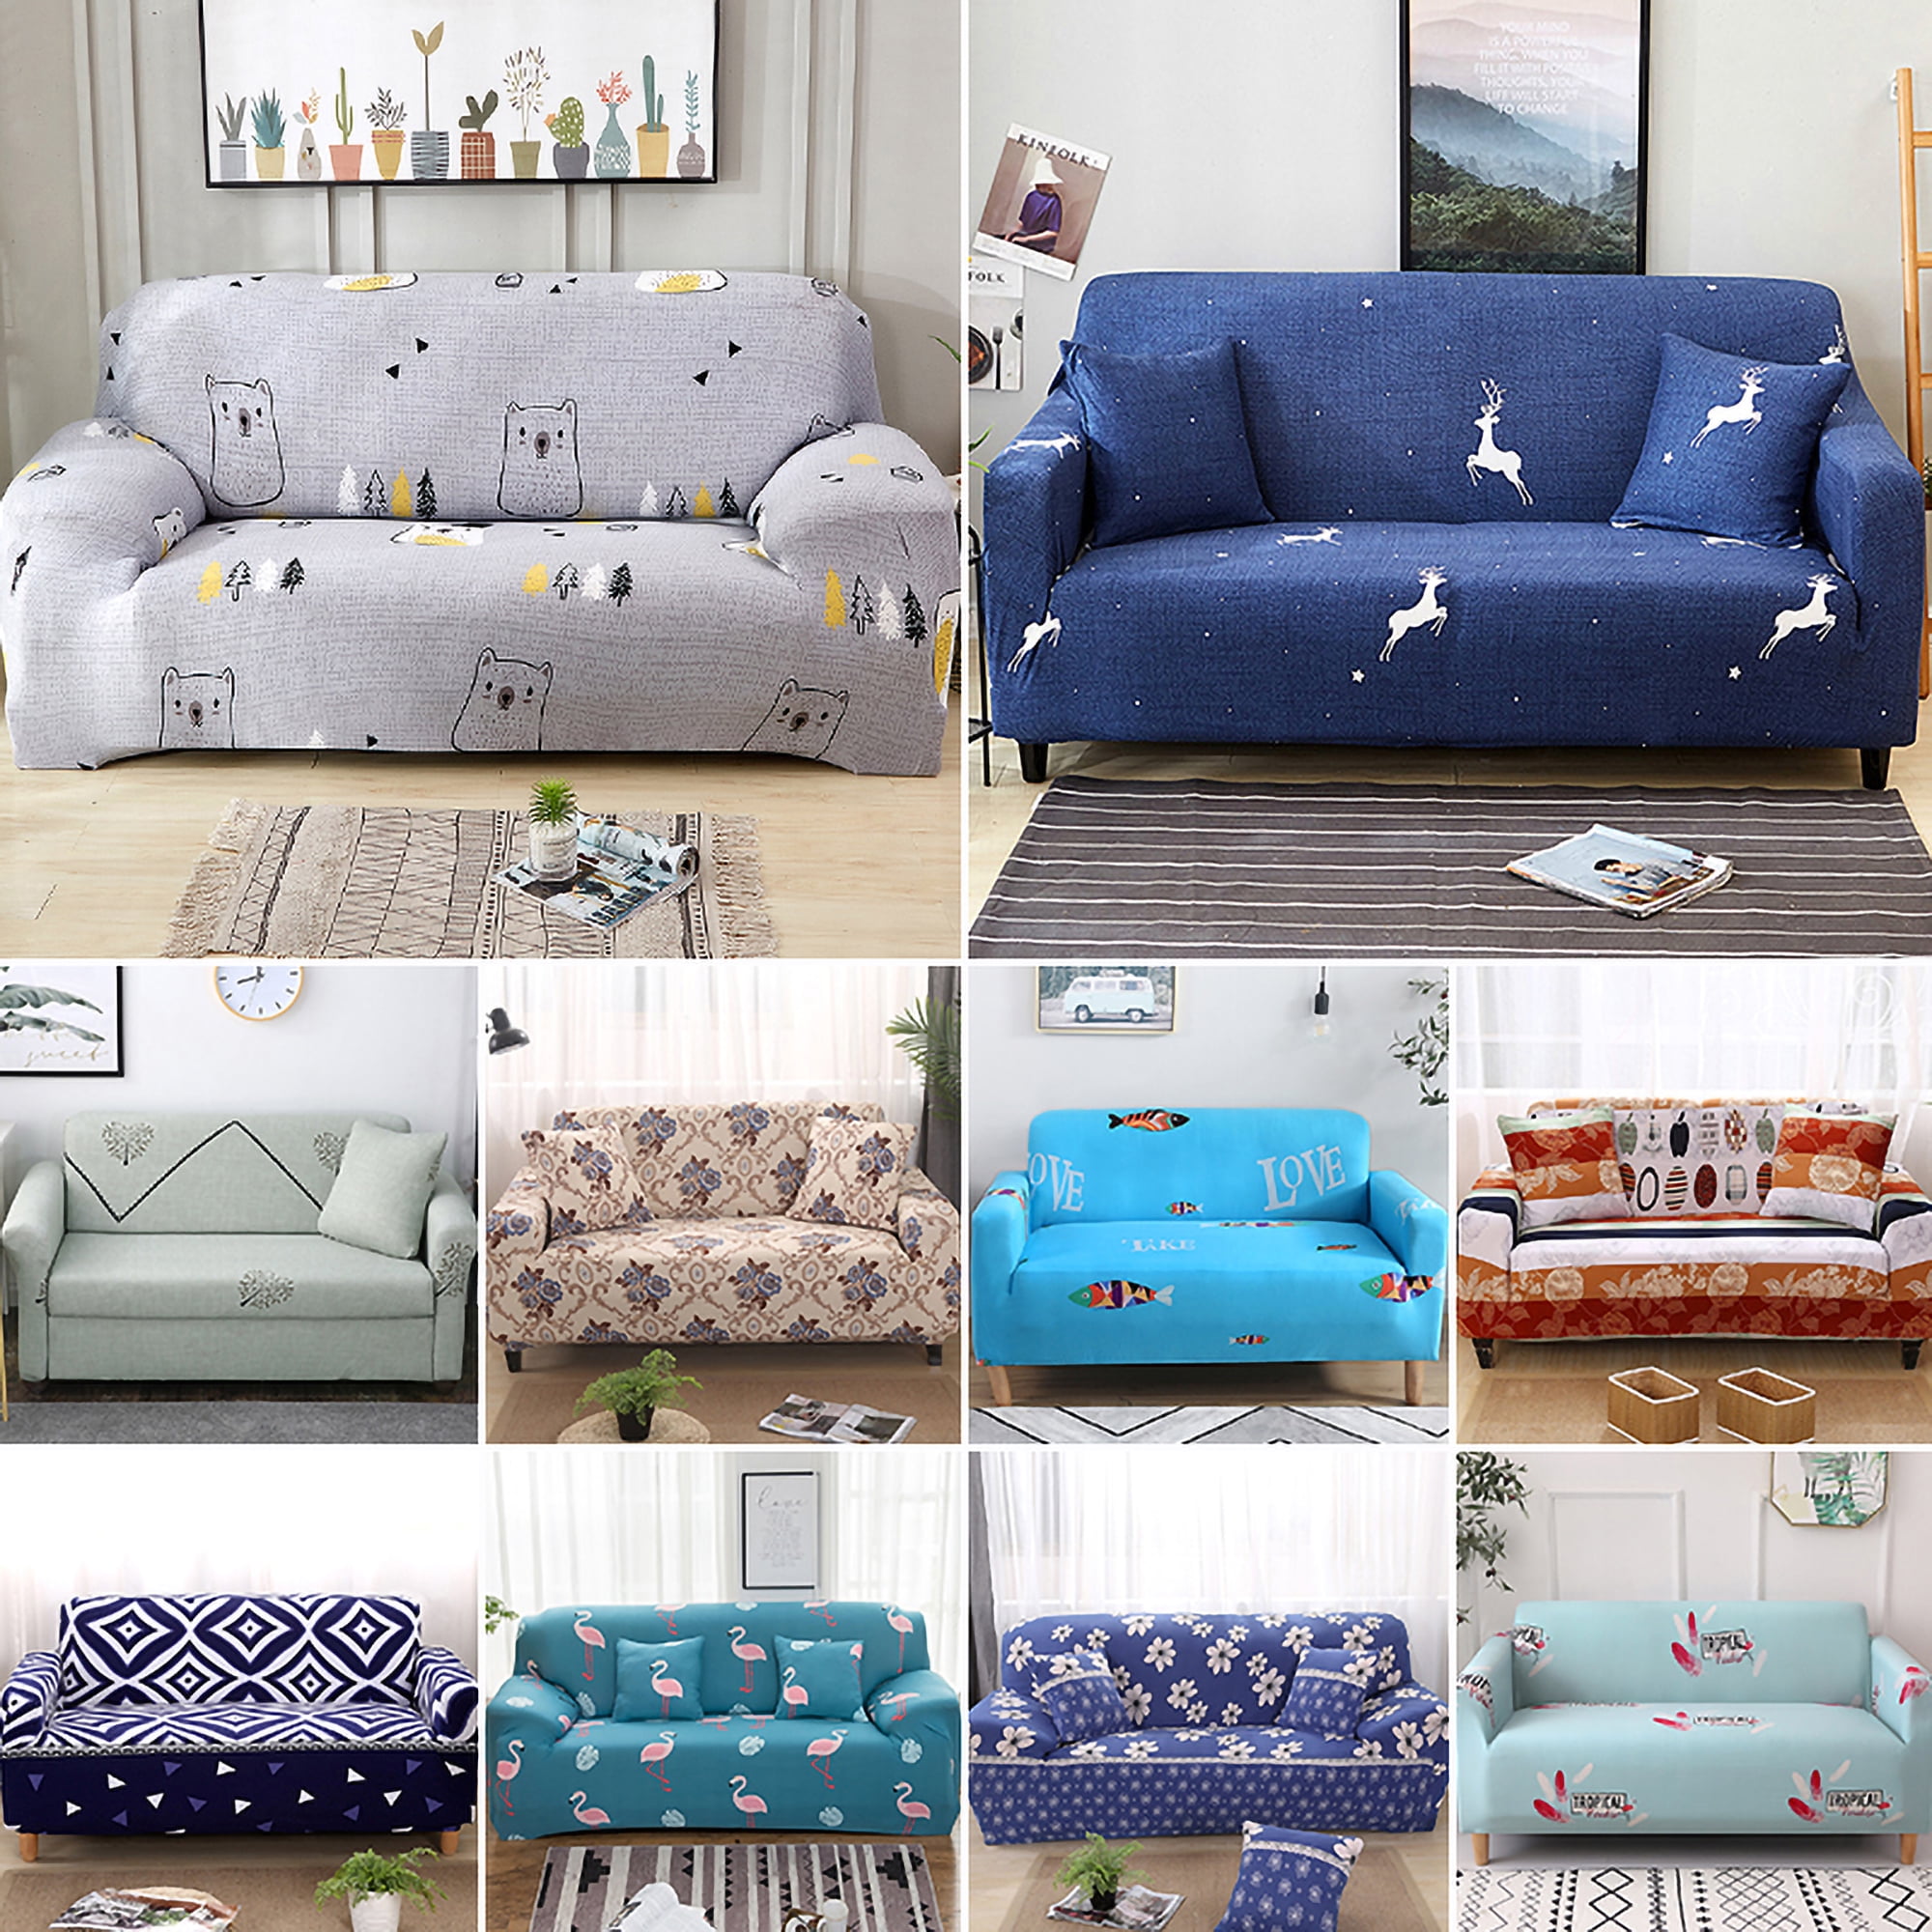 Details about  / Floral Printing Couch Covers Elastic Sofa Covers For Living Room Chair Protector